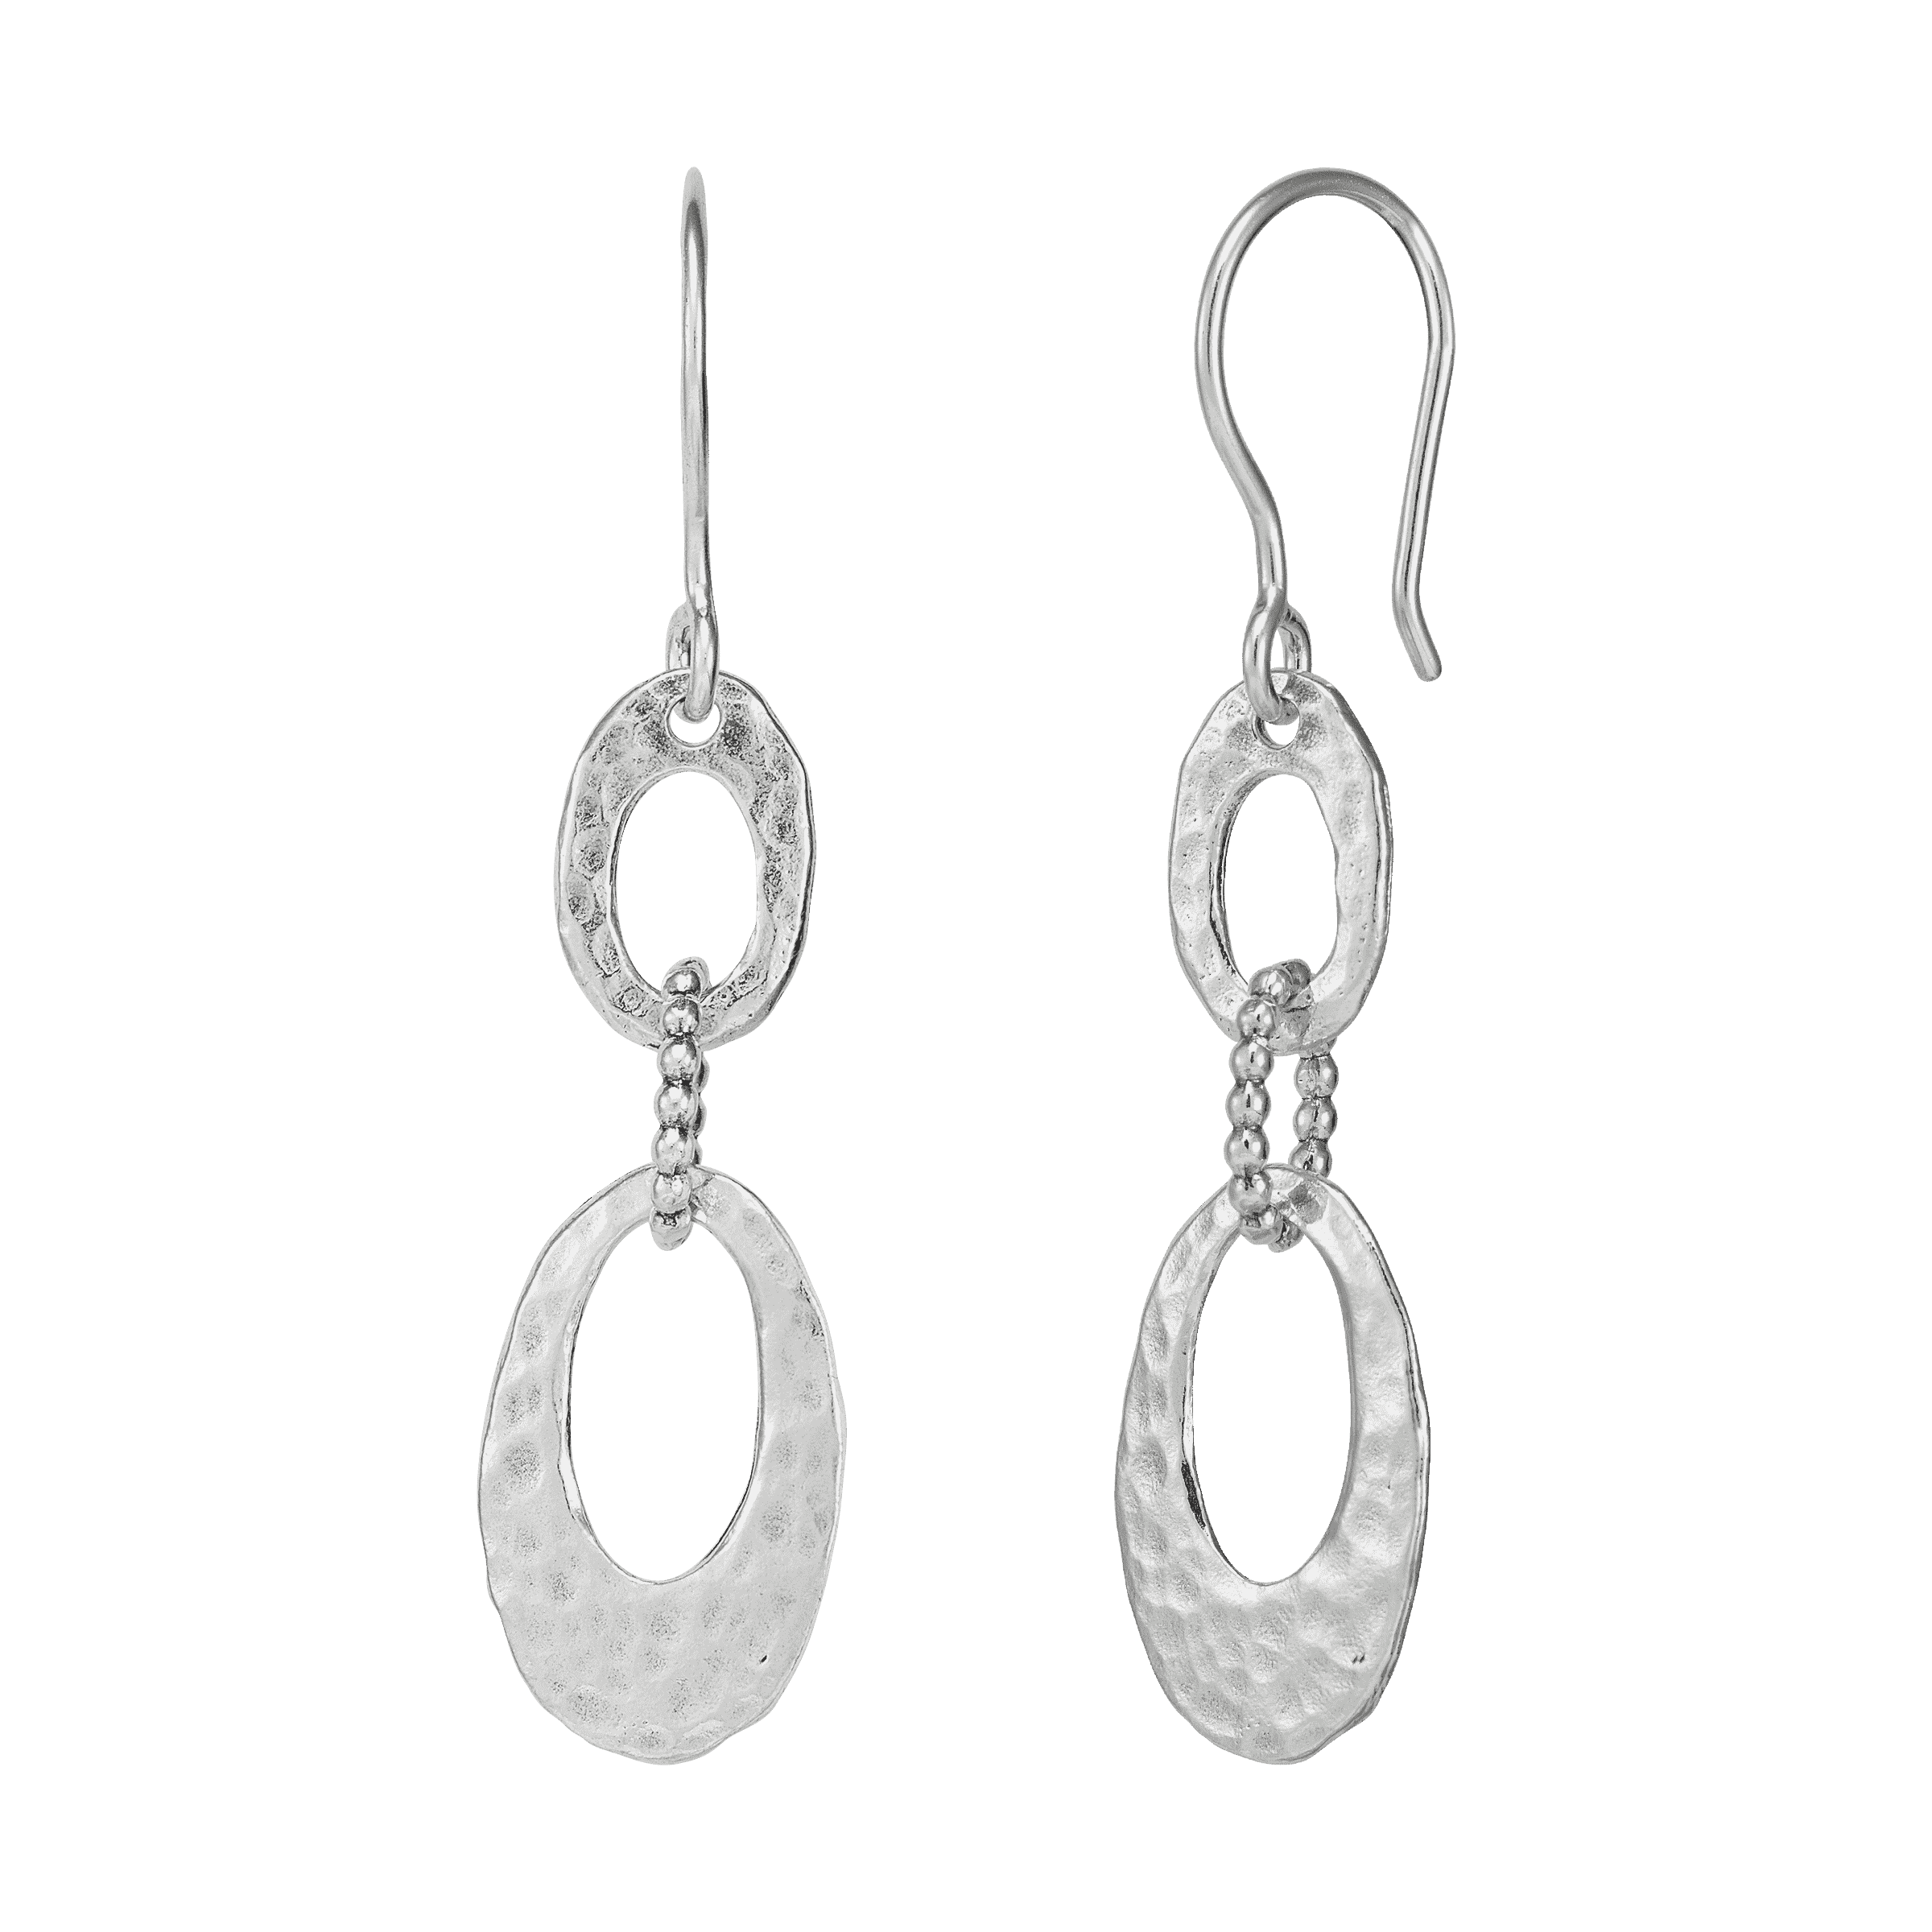 Silpada 'Circles All Around' Drop Earrings in Sterling Silver